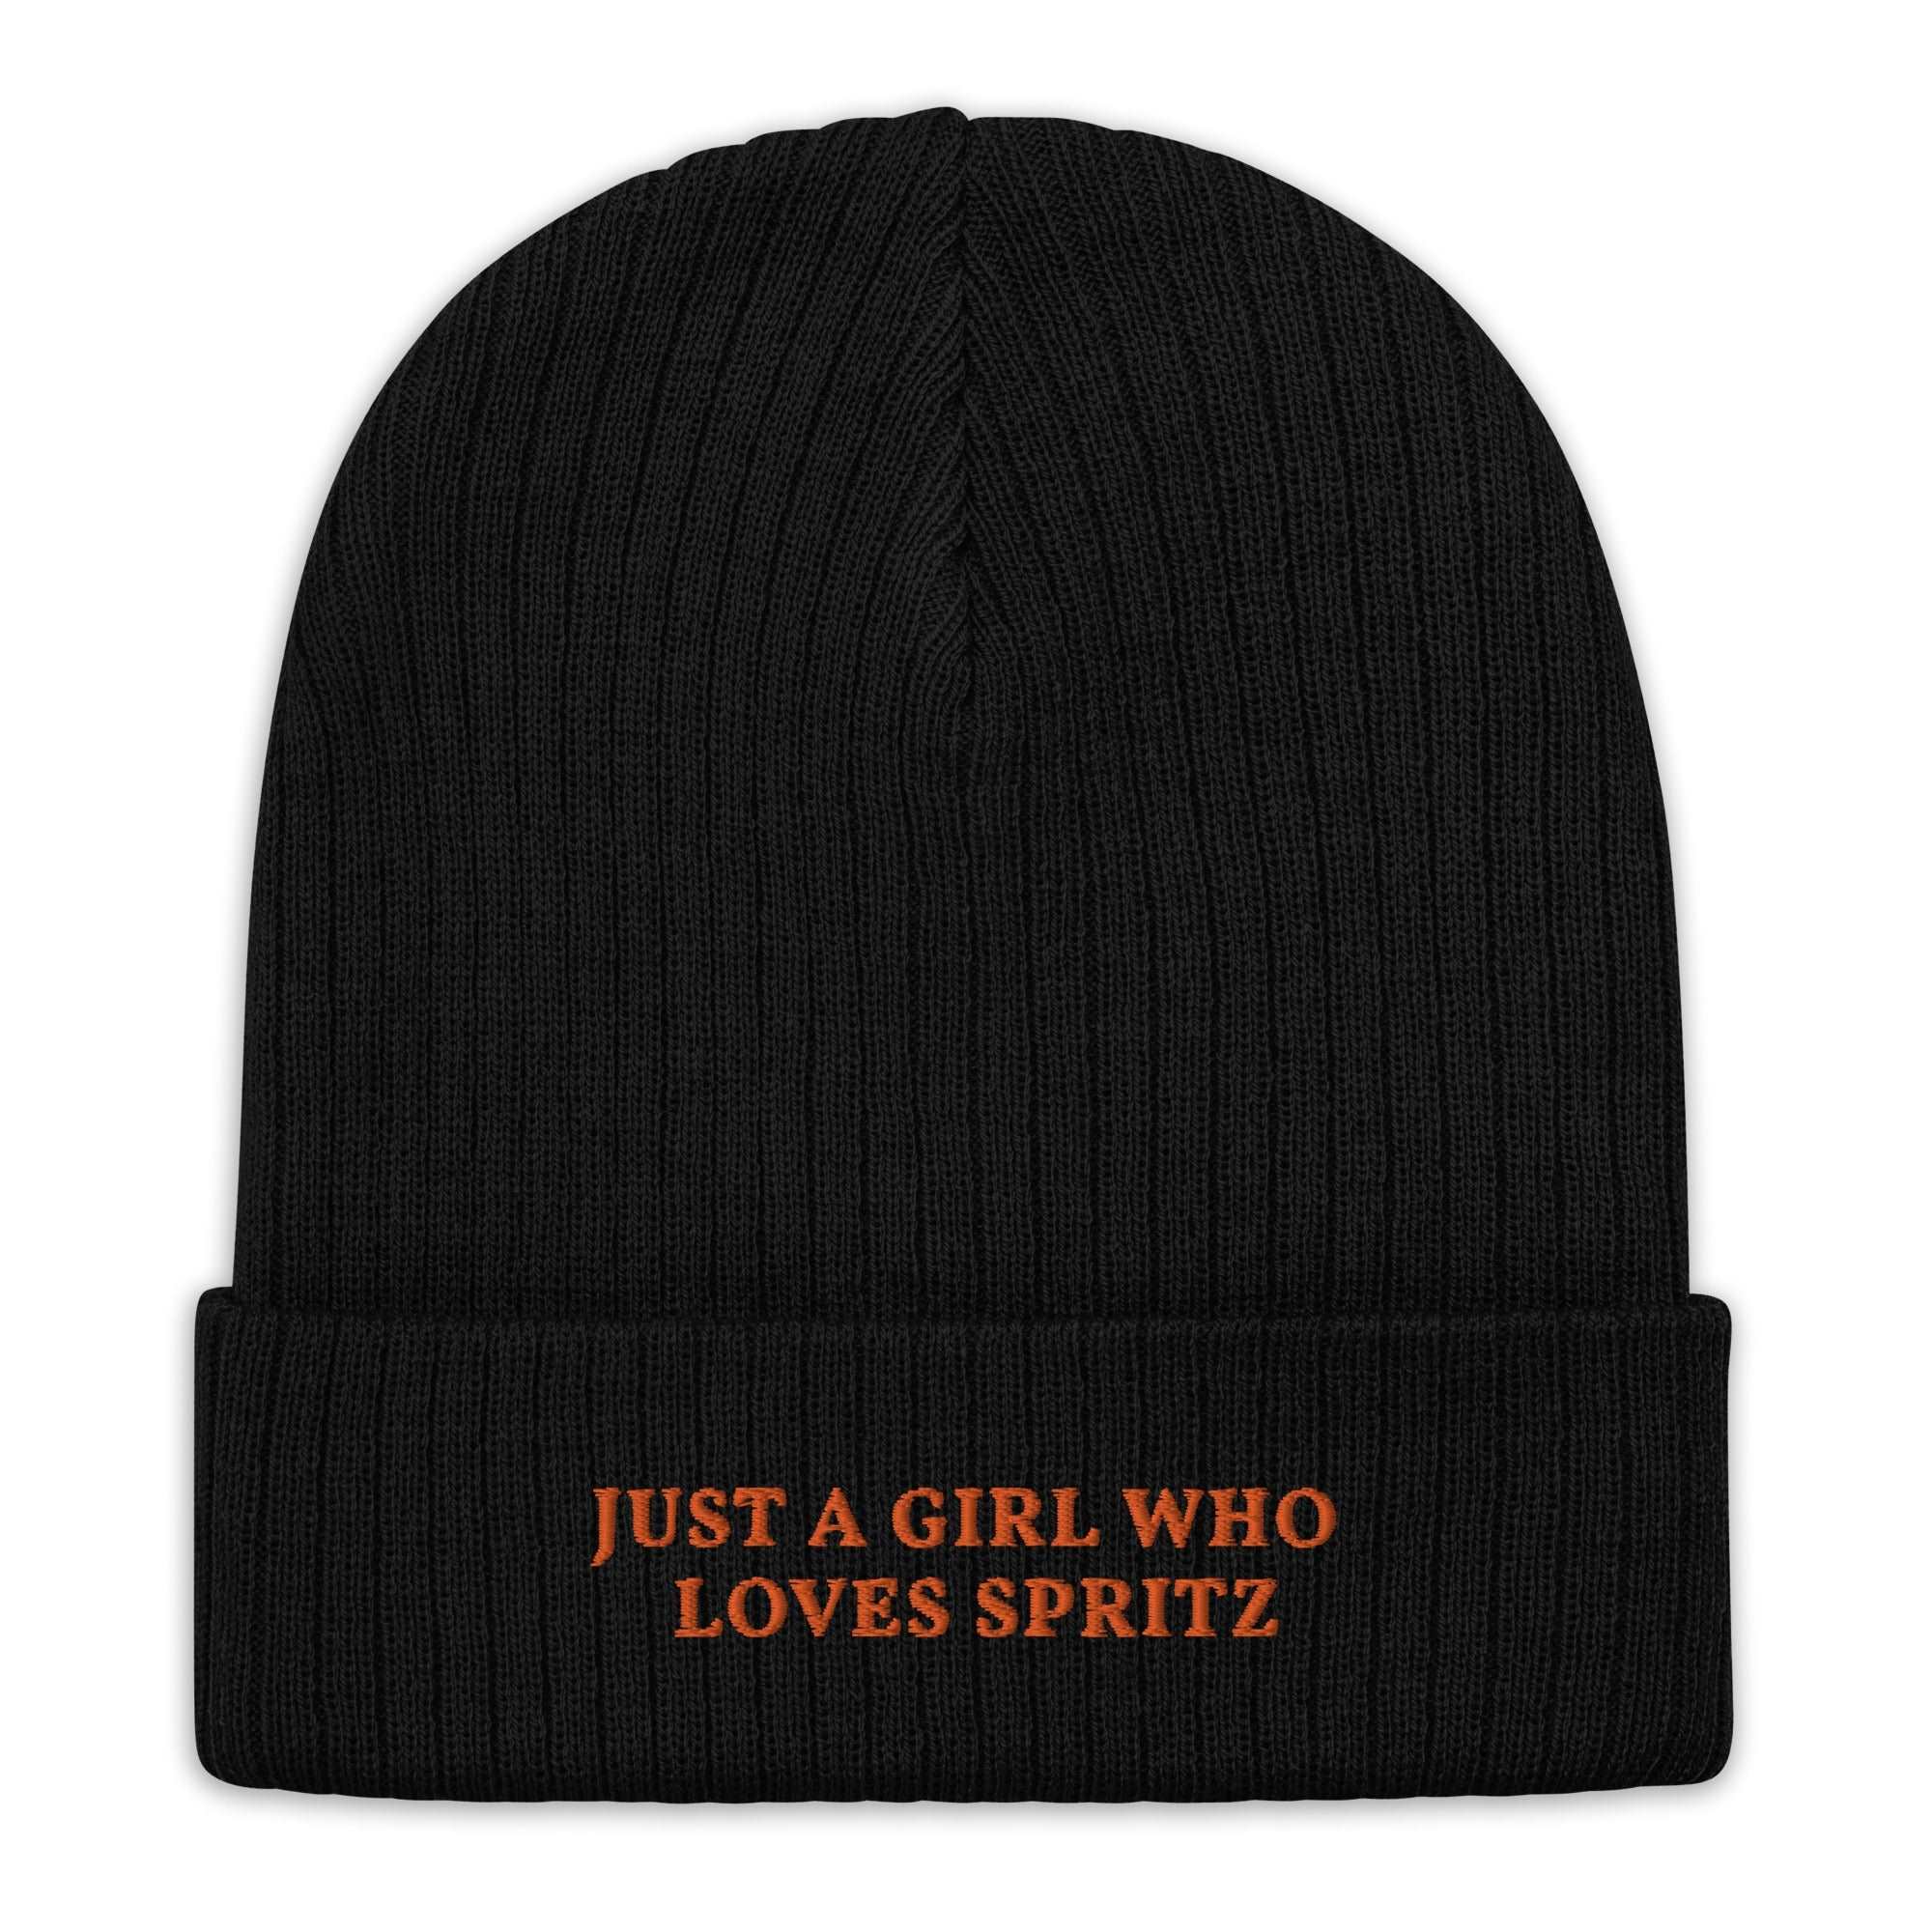 Just a Girl who loves Spritz - Beanie - The Refined Spirit